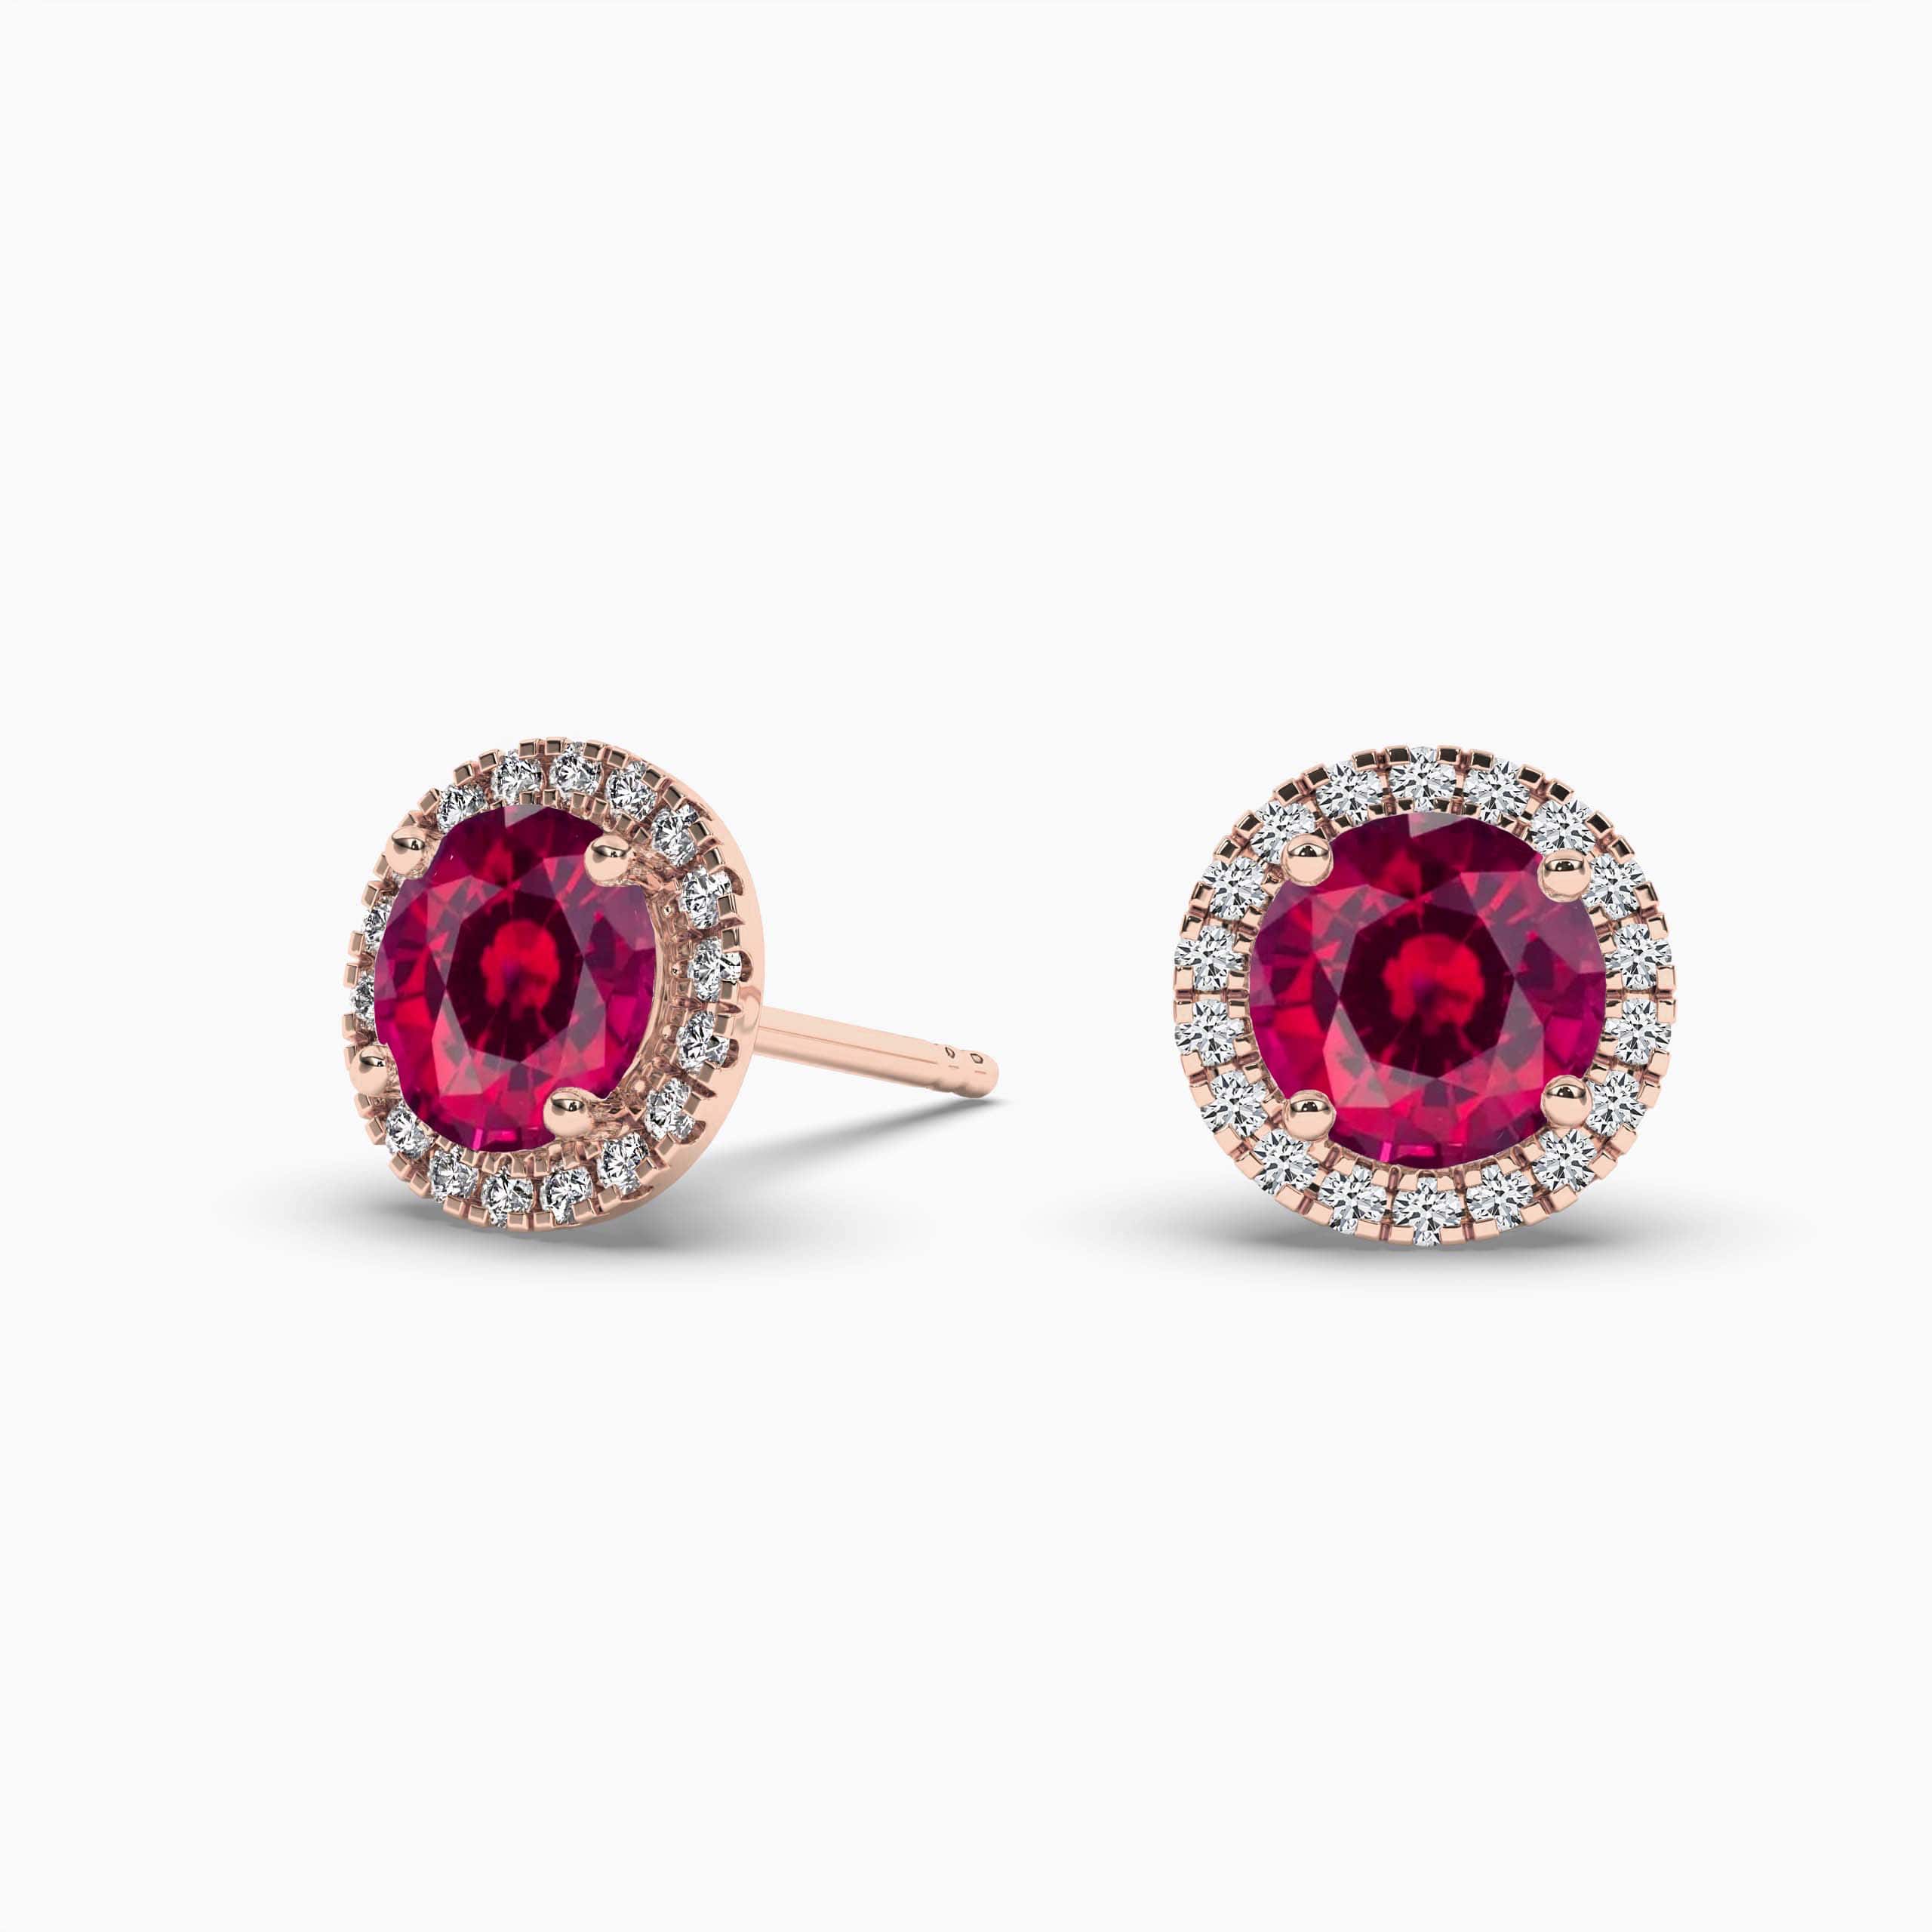 Rose Gold Round Ruby Gemstone Earrings in Halo